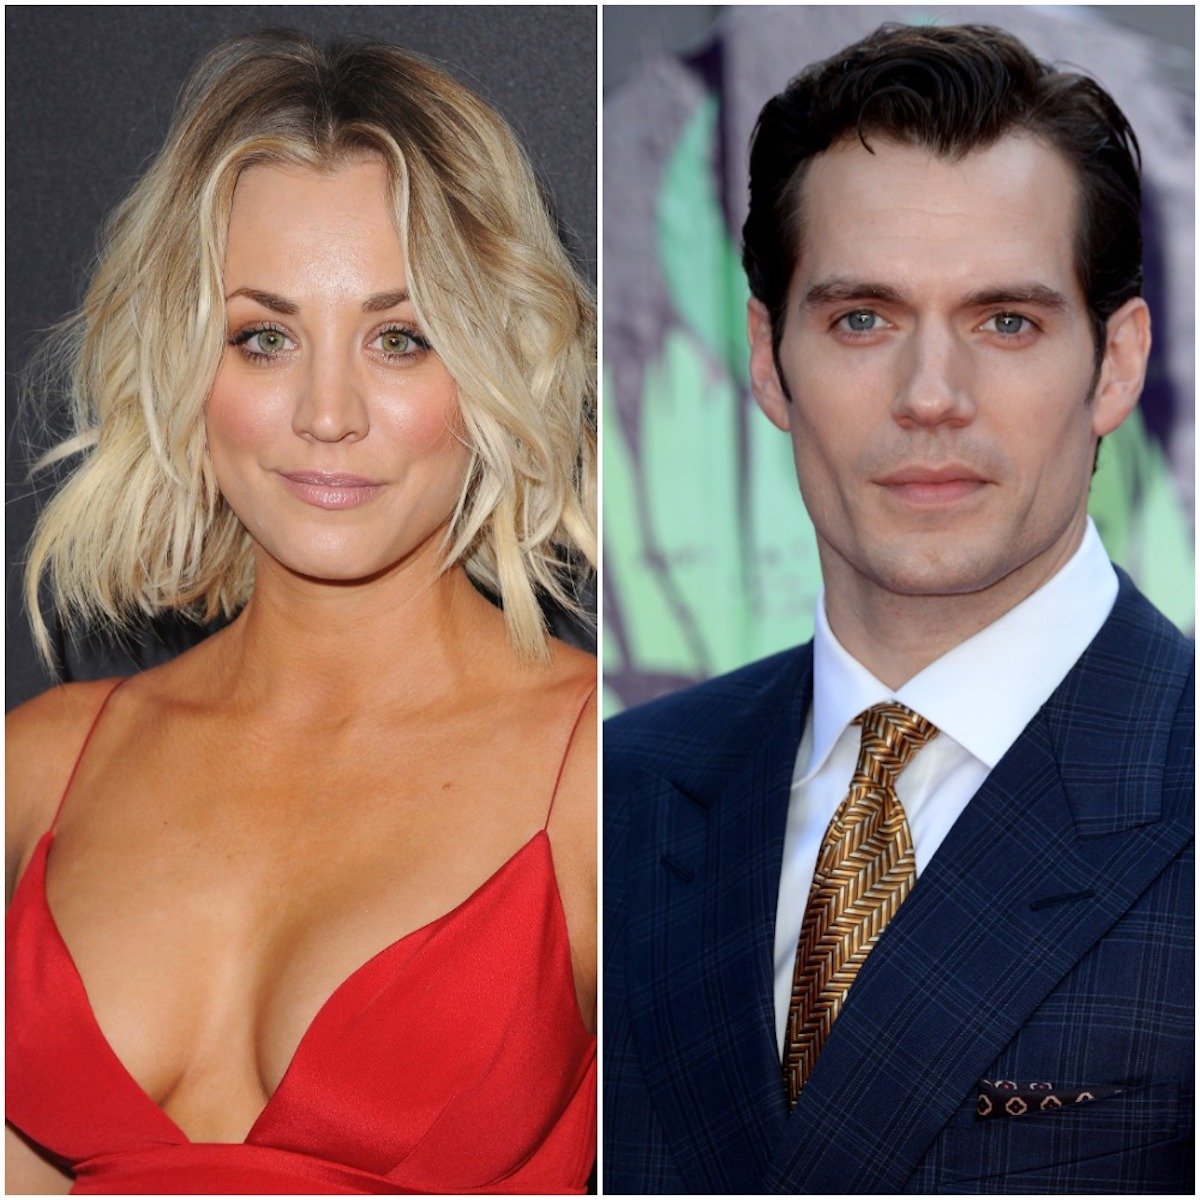 Henry Cavill and Kaley Cuoco split after 12 days